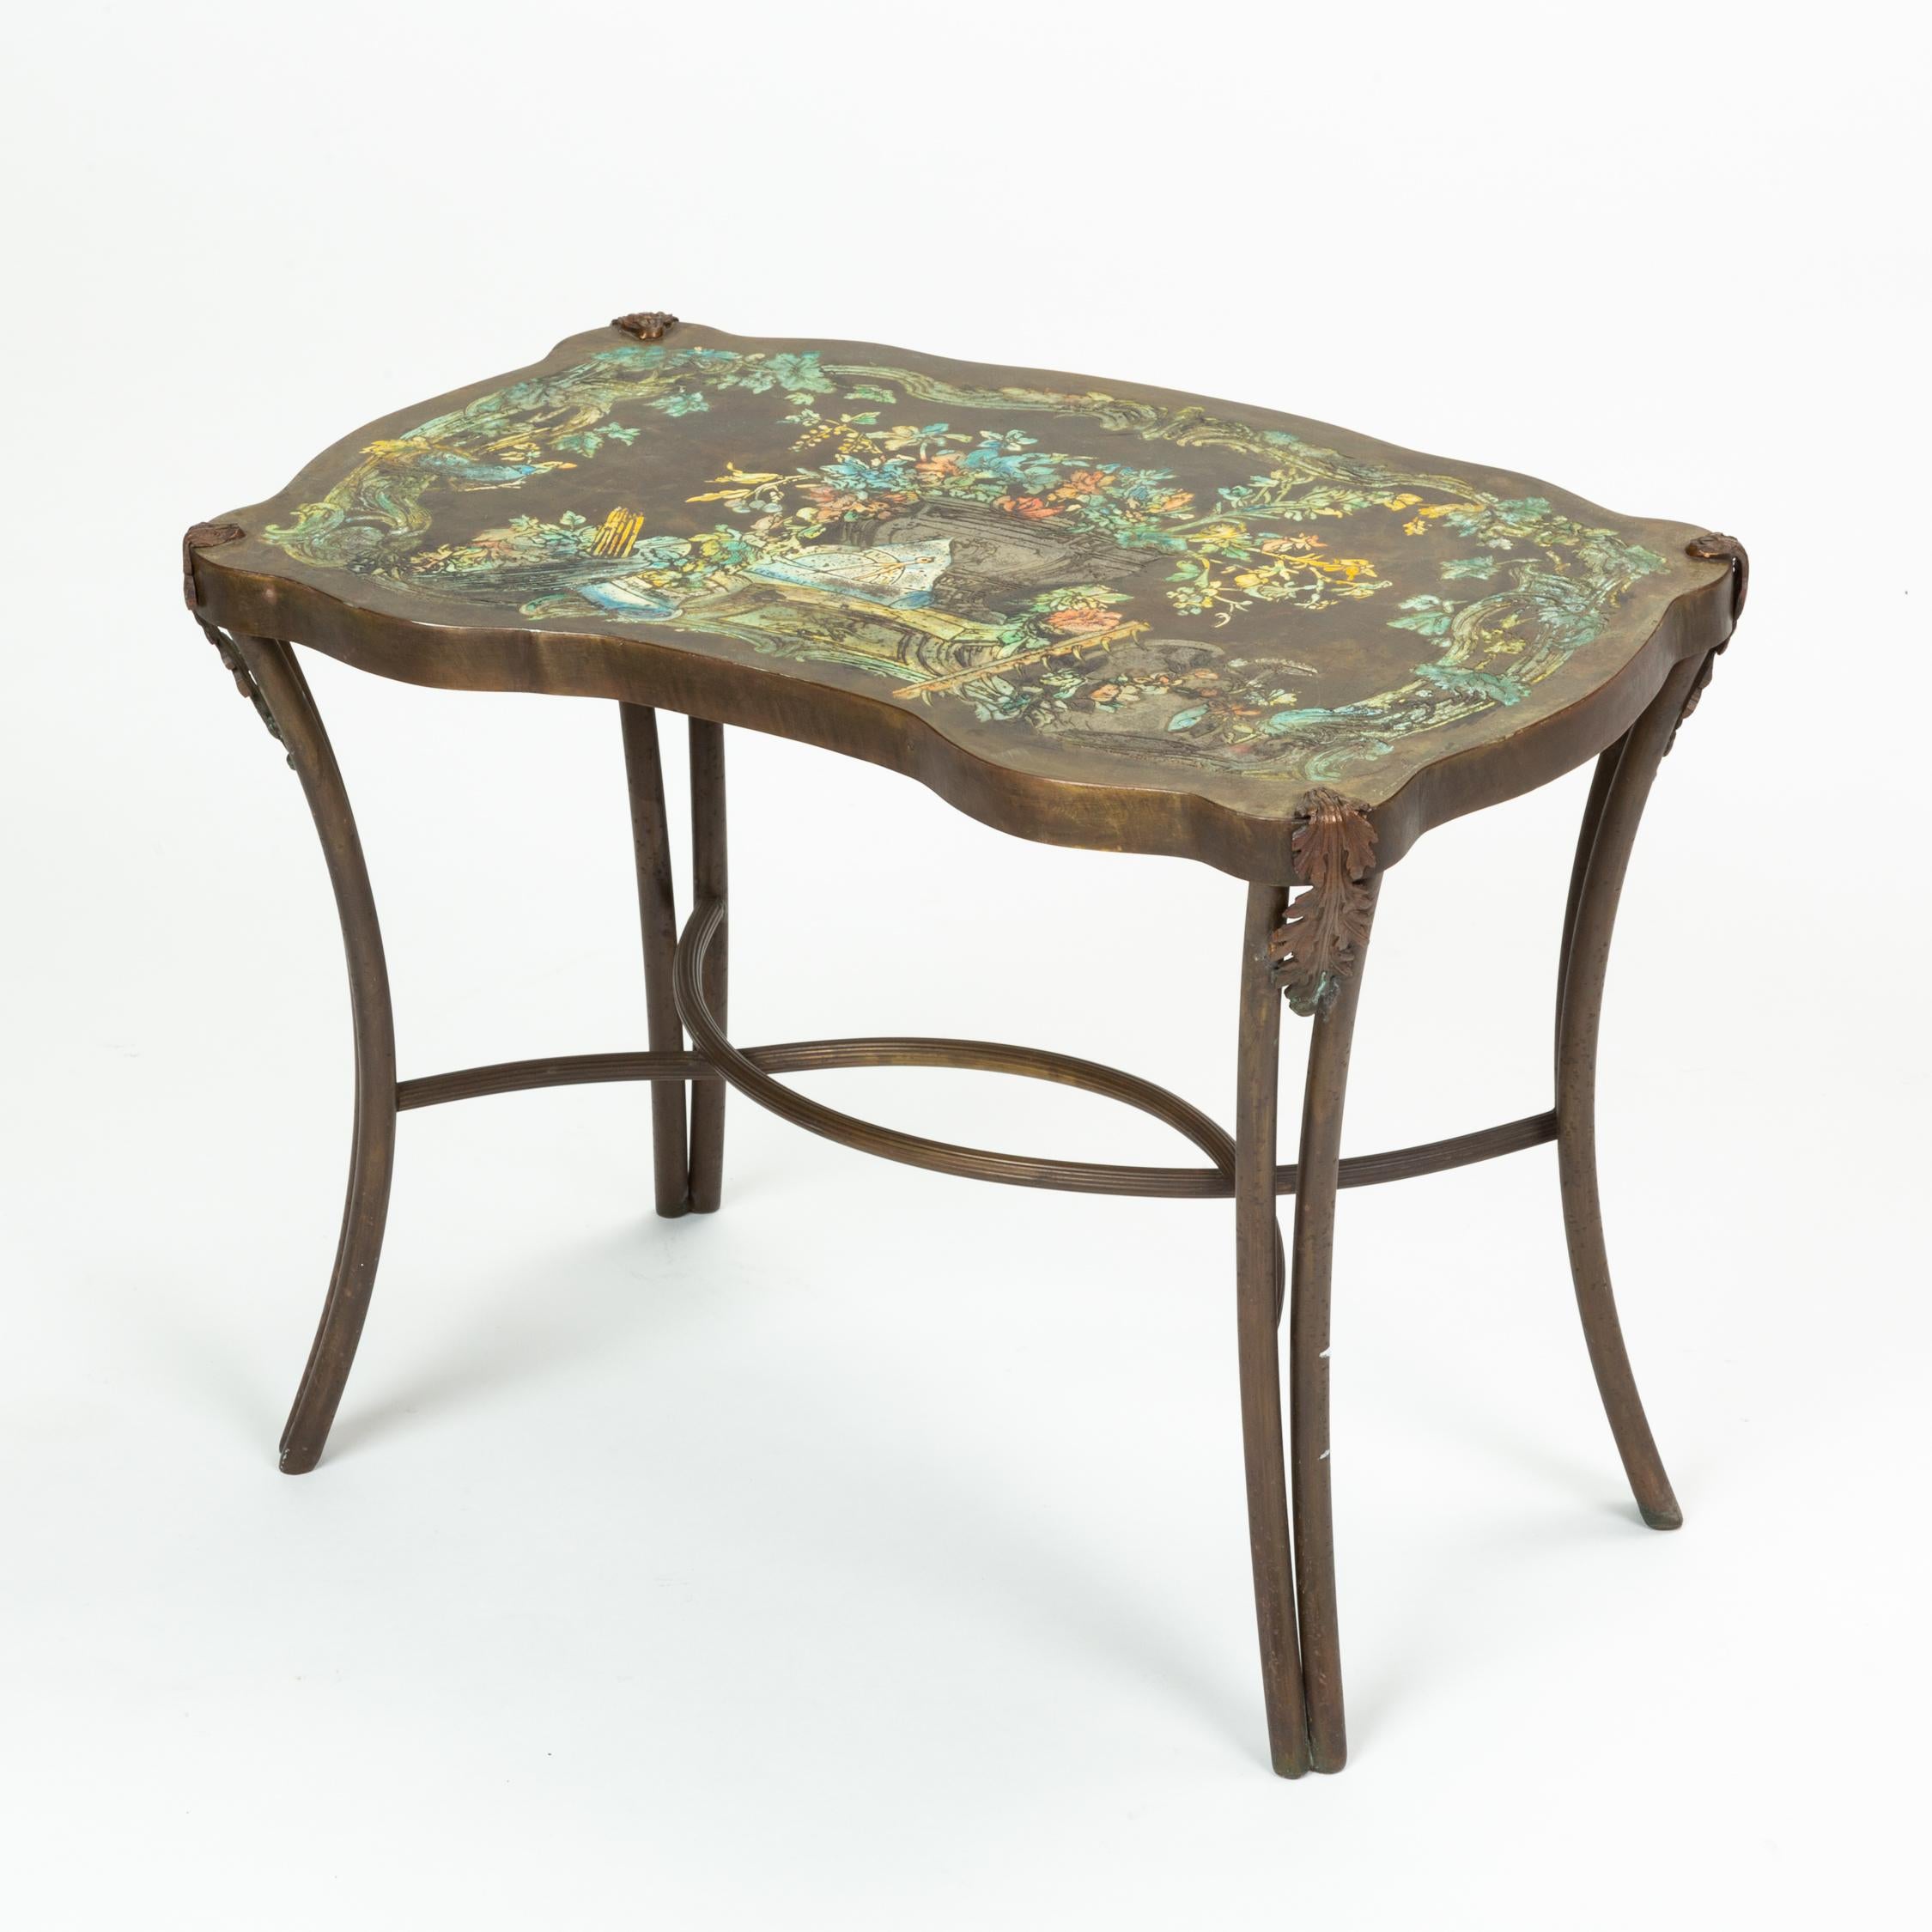 Hand-Crafted Pair of Philip and Kelvin LaVerne “Madame Pompadour” Enameled Bronze Tables